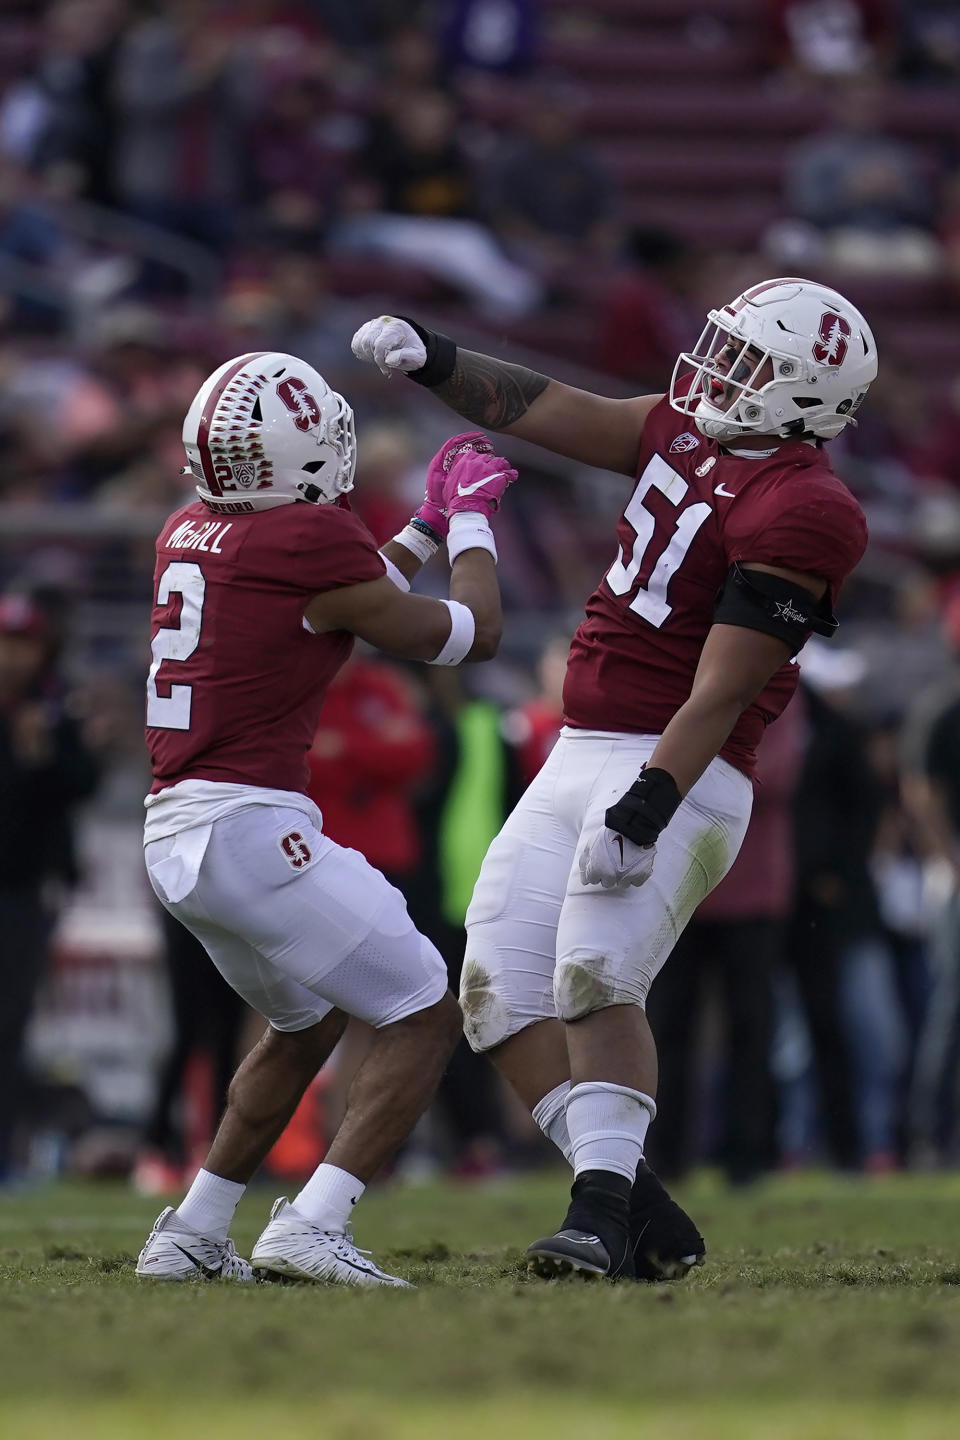 Stanford safety Jonathan McGill (2) celebrates with defensive lineman Jaxson Moi (51) during the second half of an NCAA college football game against Arizona State in Stanford, Calif., Saturday, Oct. 22, 2022. (AP Photo/Jeff Chiu)